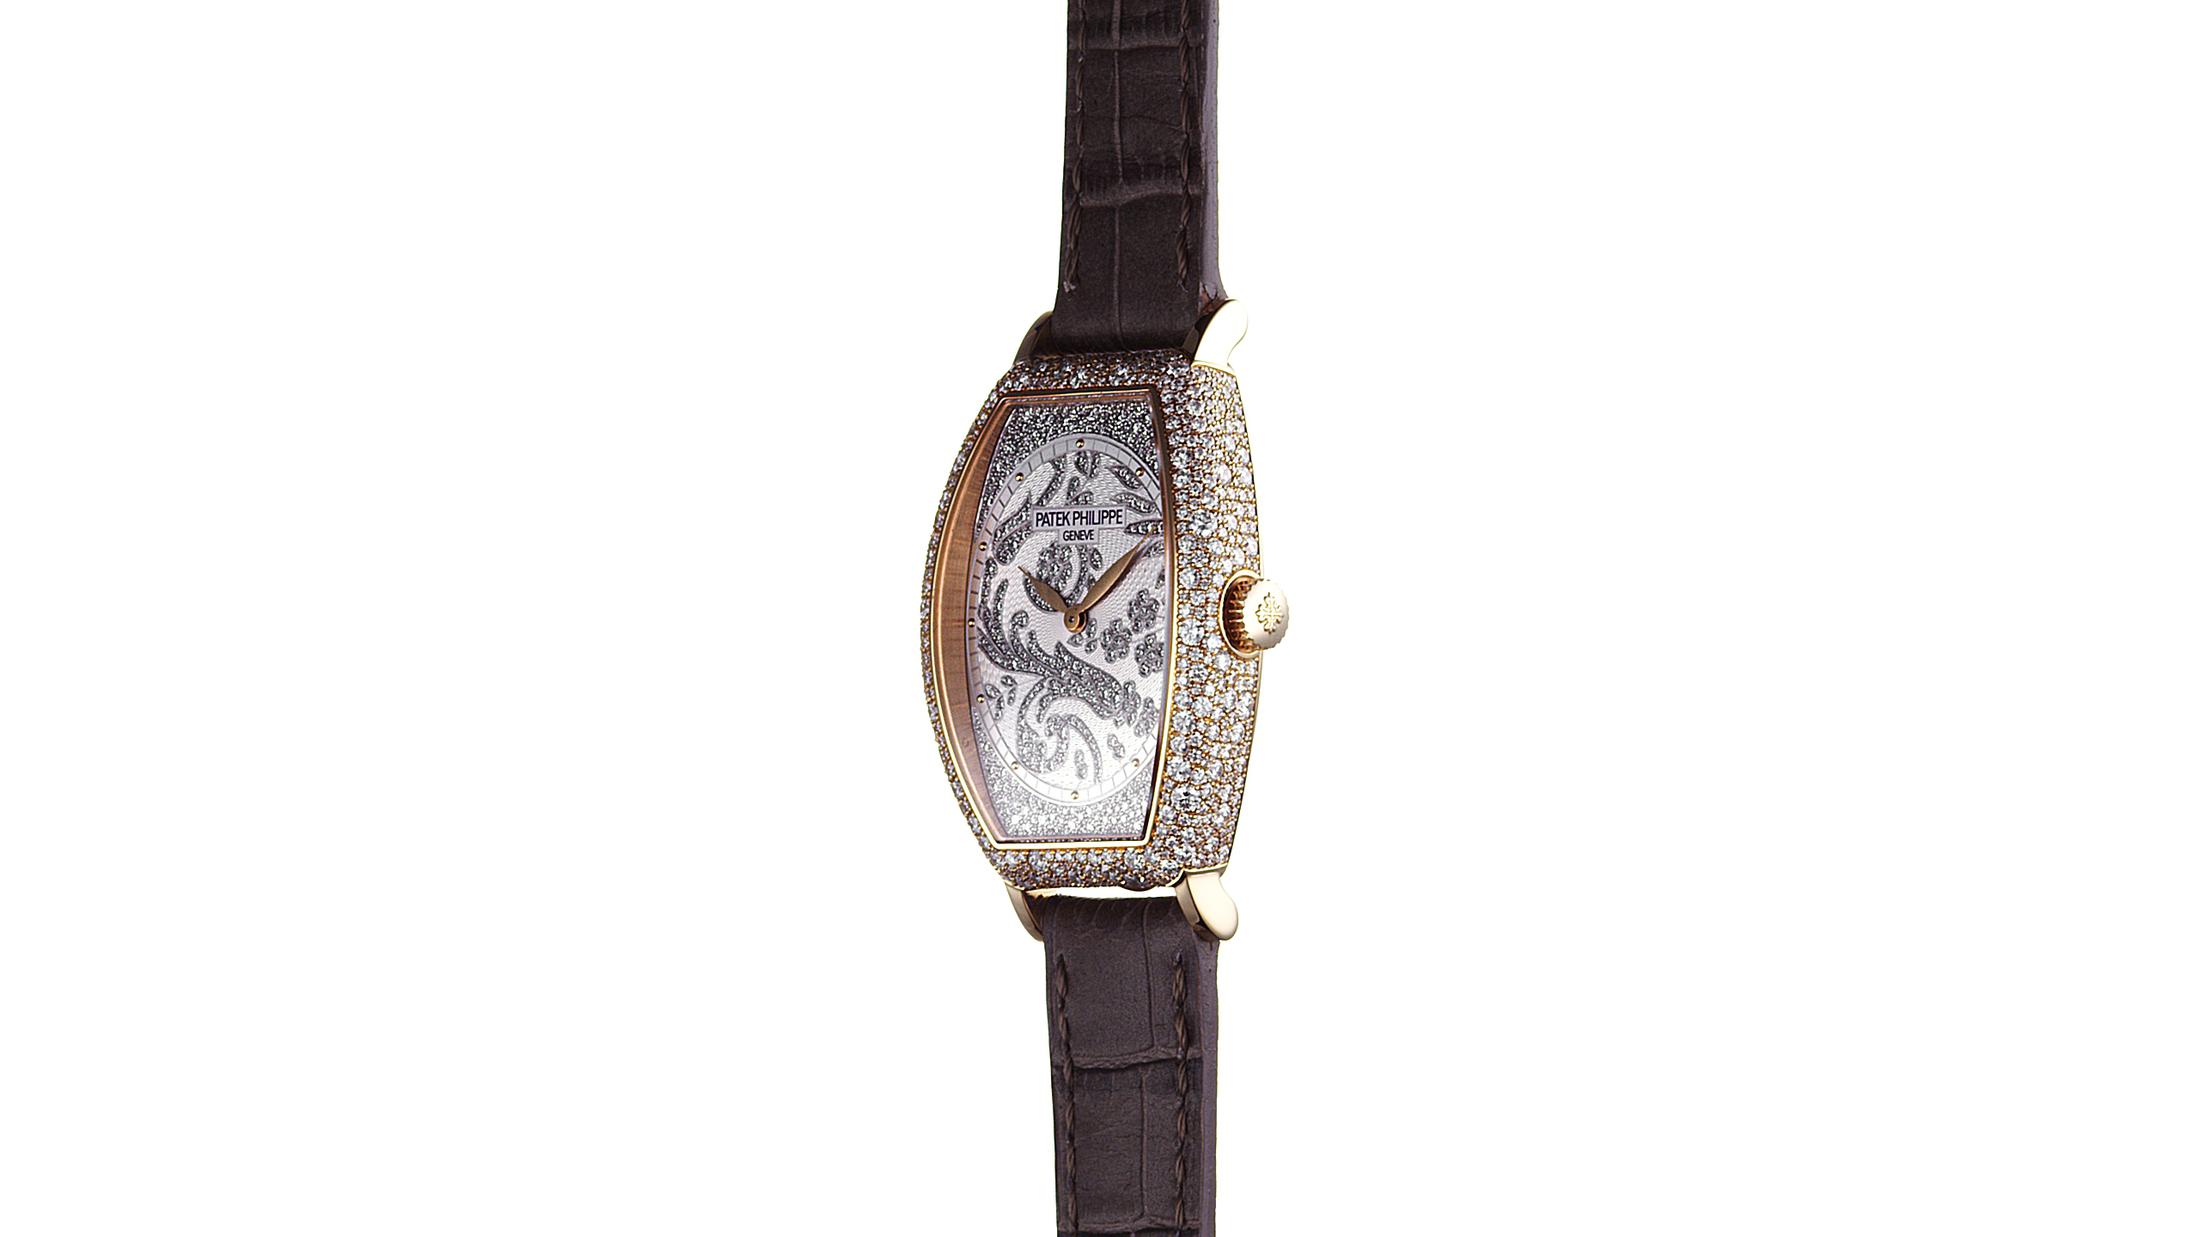 Patek Philippe Top-Winding Driver’s Wrist Watch with Asymmetric Lugs -- Driver Watch